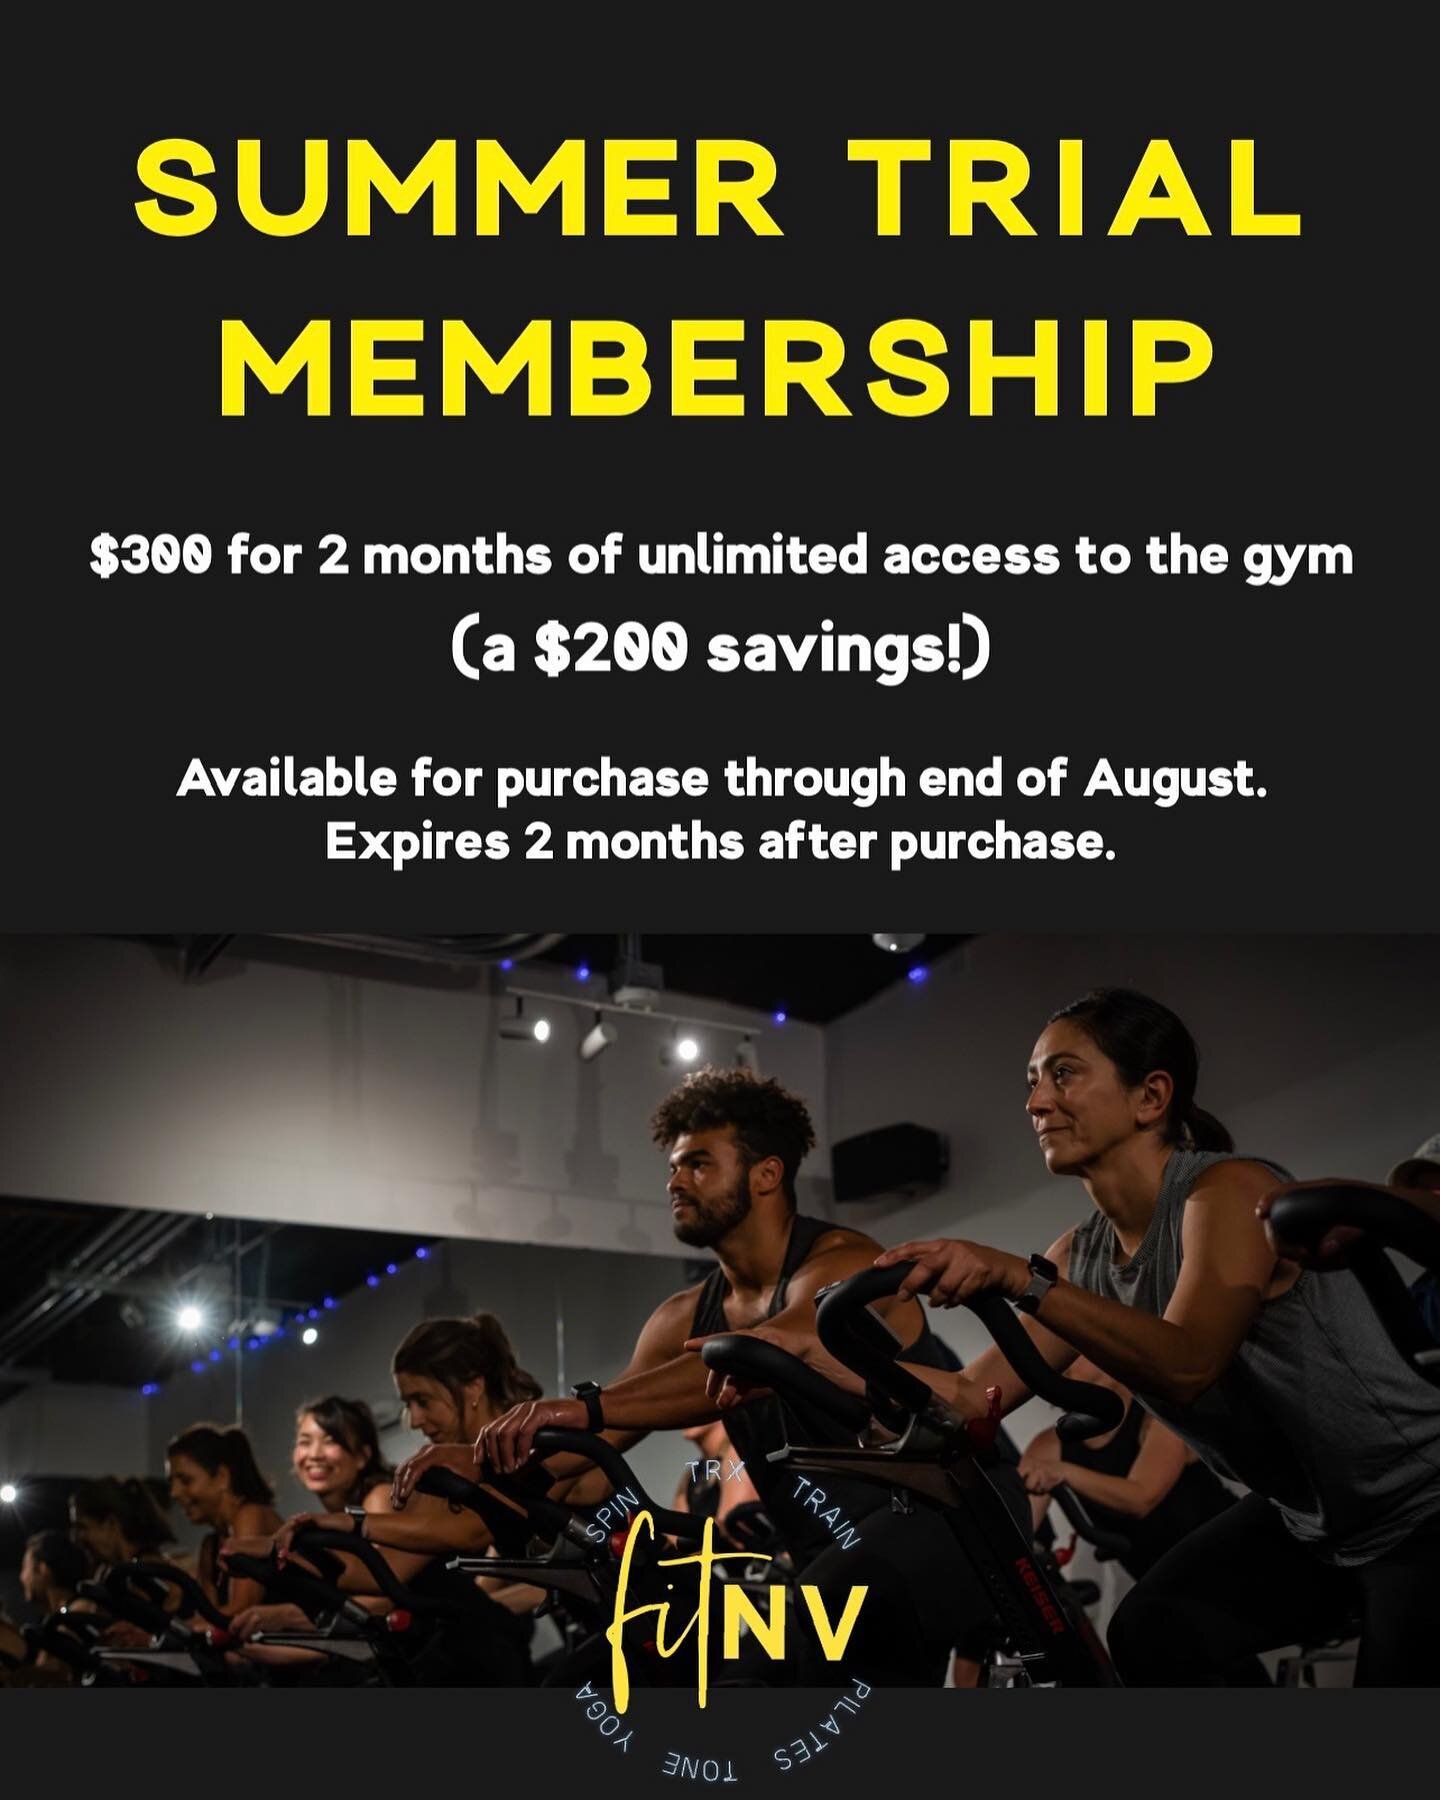 Have you heard?!?! Save $200 and get in here! Try us out for 2 months 💥 #summertrial #membership #fitnv #fitnvonmain #noinitiationfees